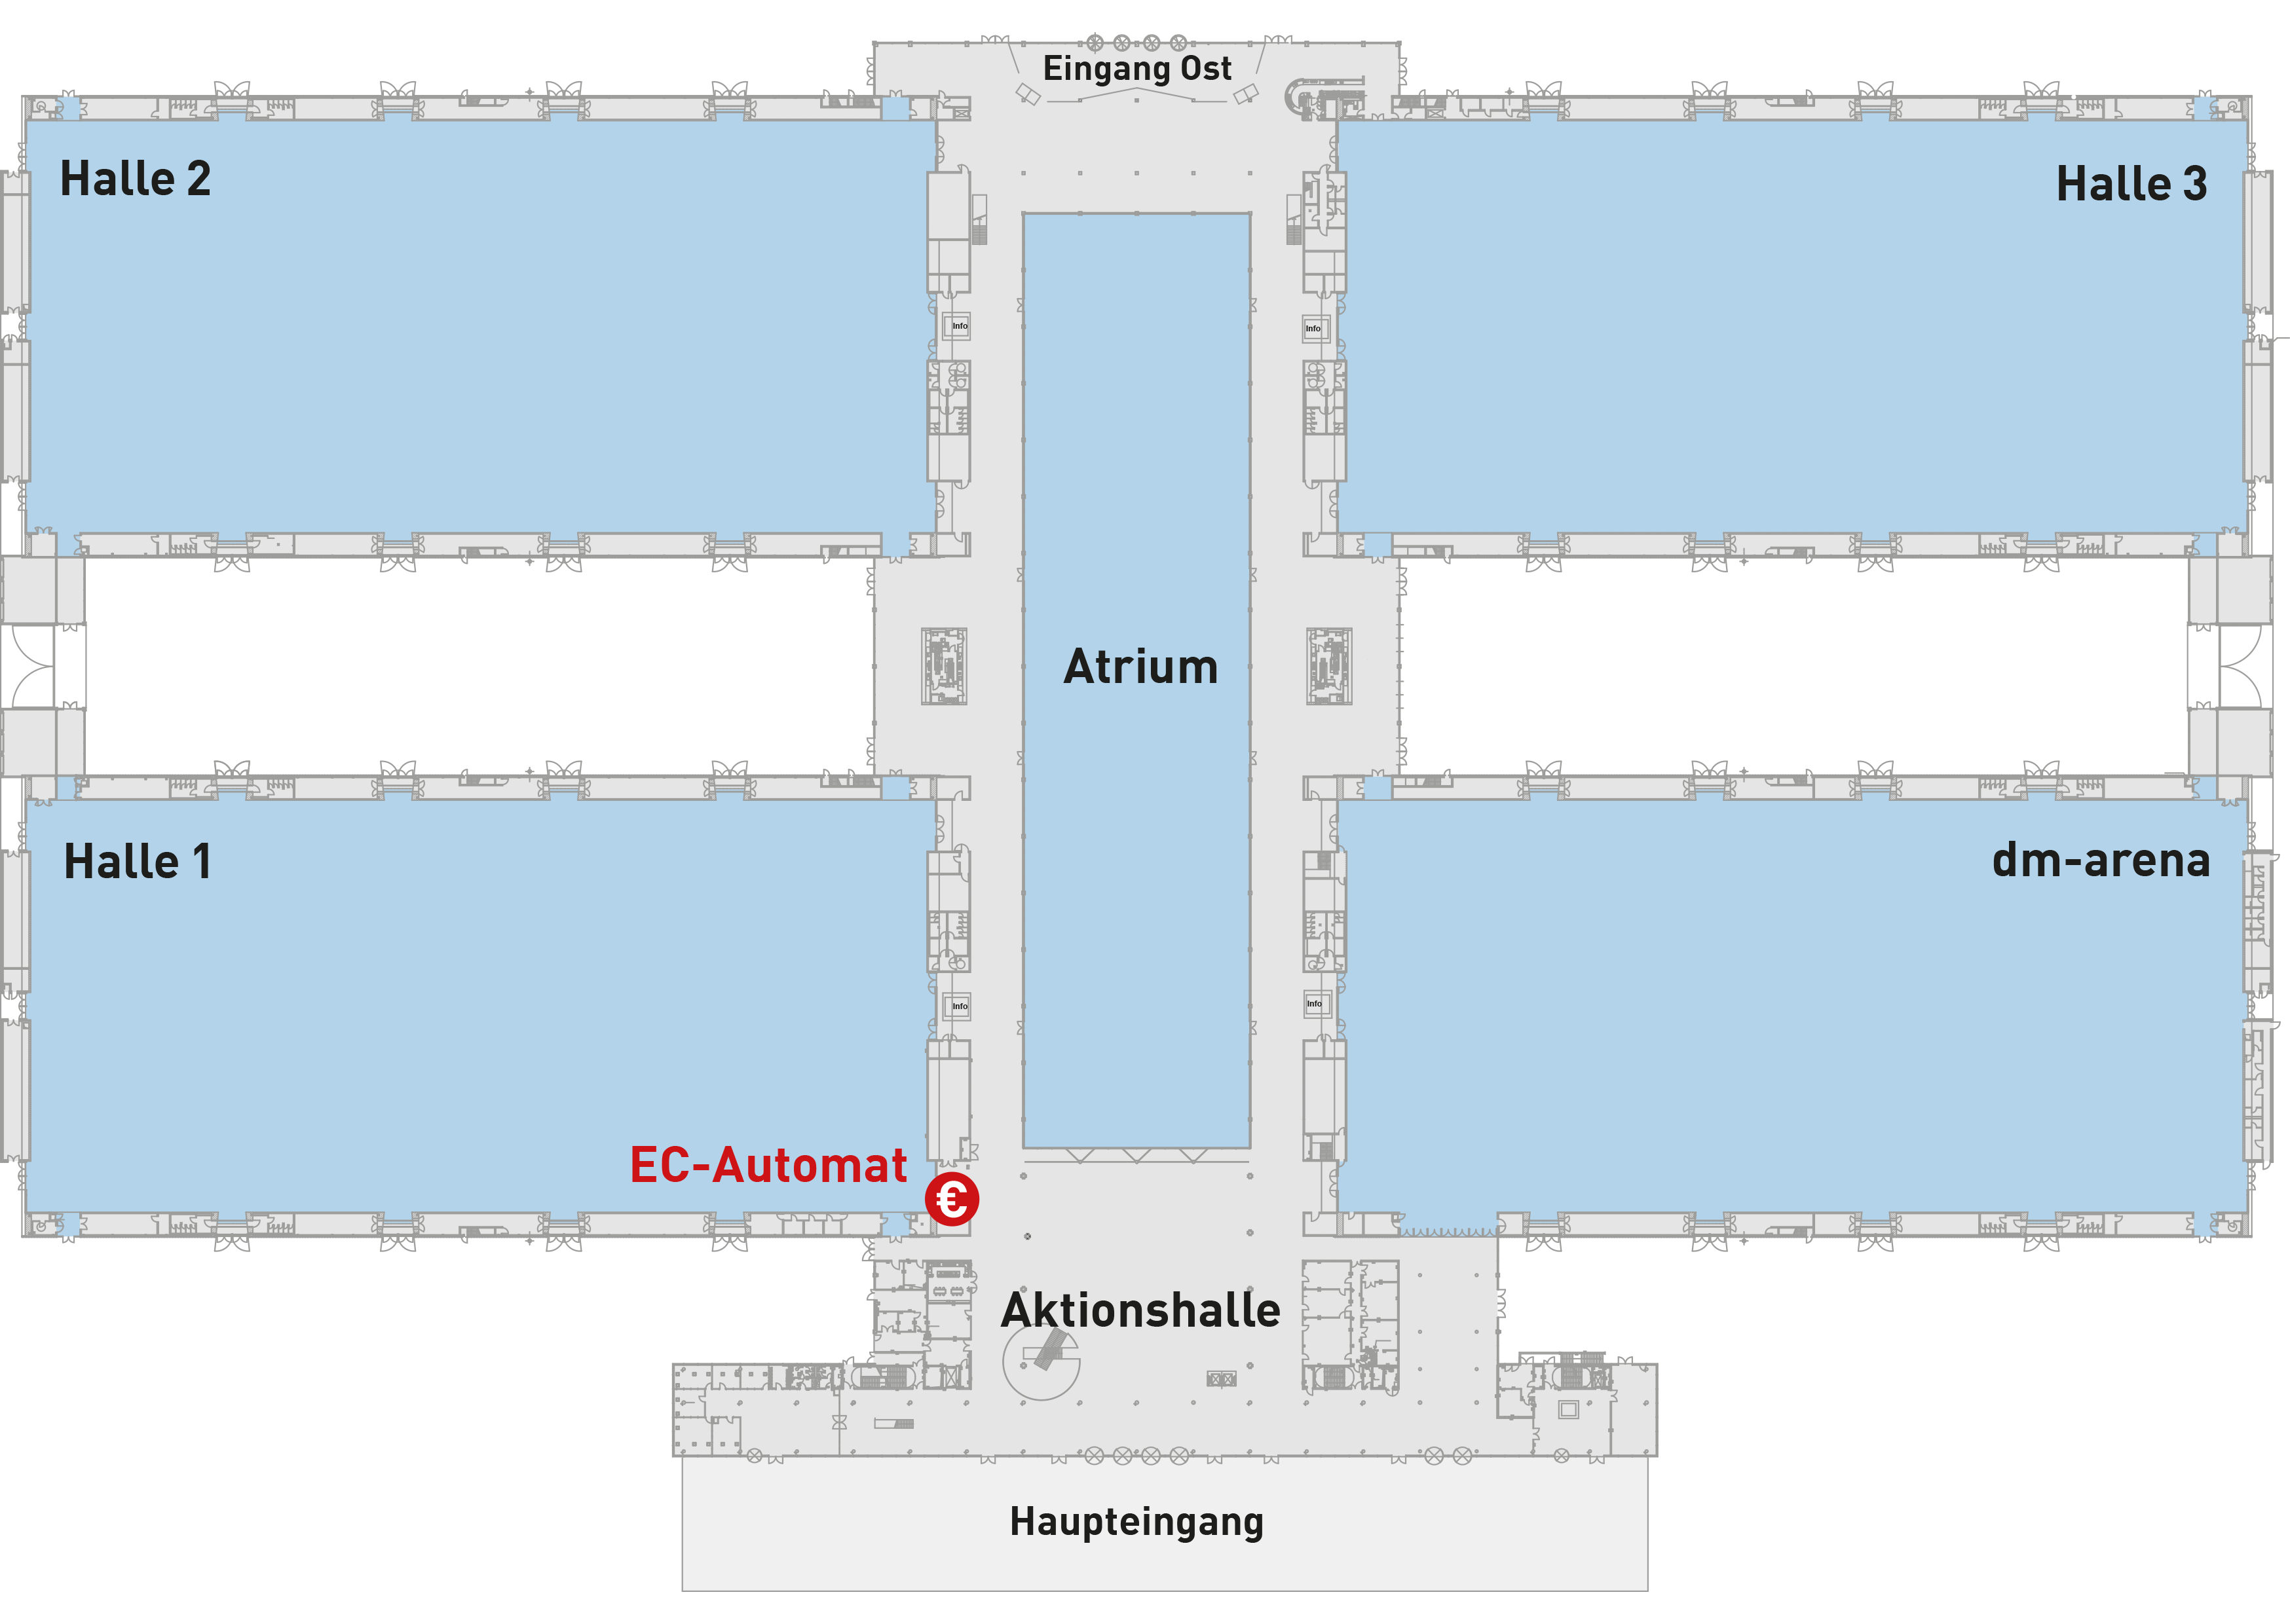 Graphic of the site plan of Messe Karlsruhe with the locations of the EC machines directly on the exhibition grounds.